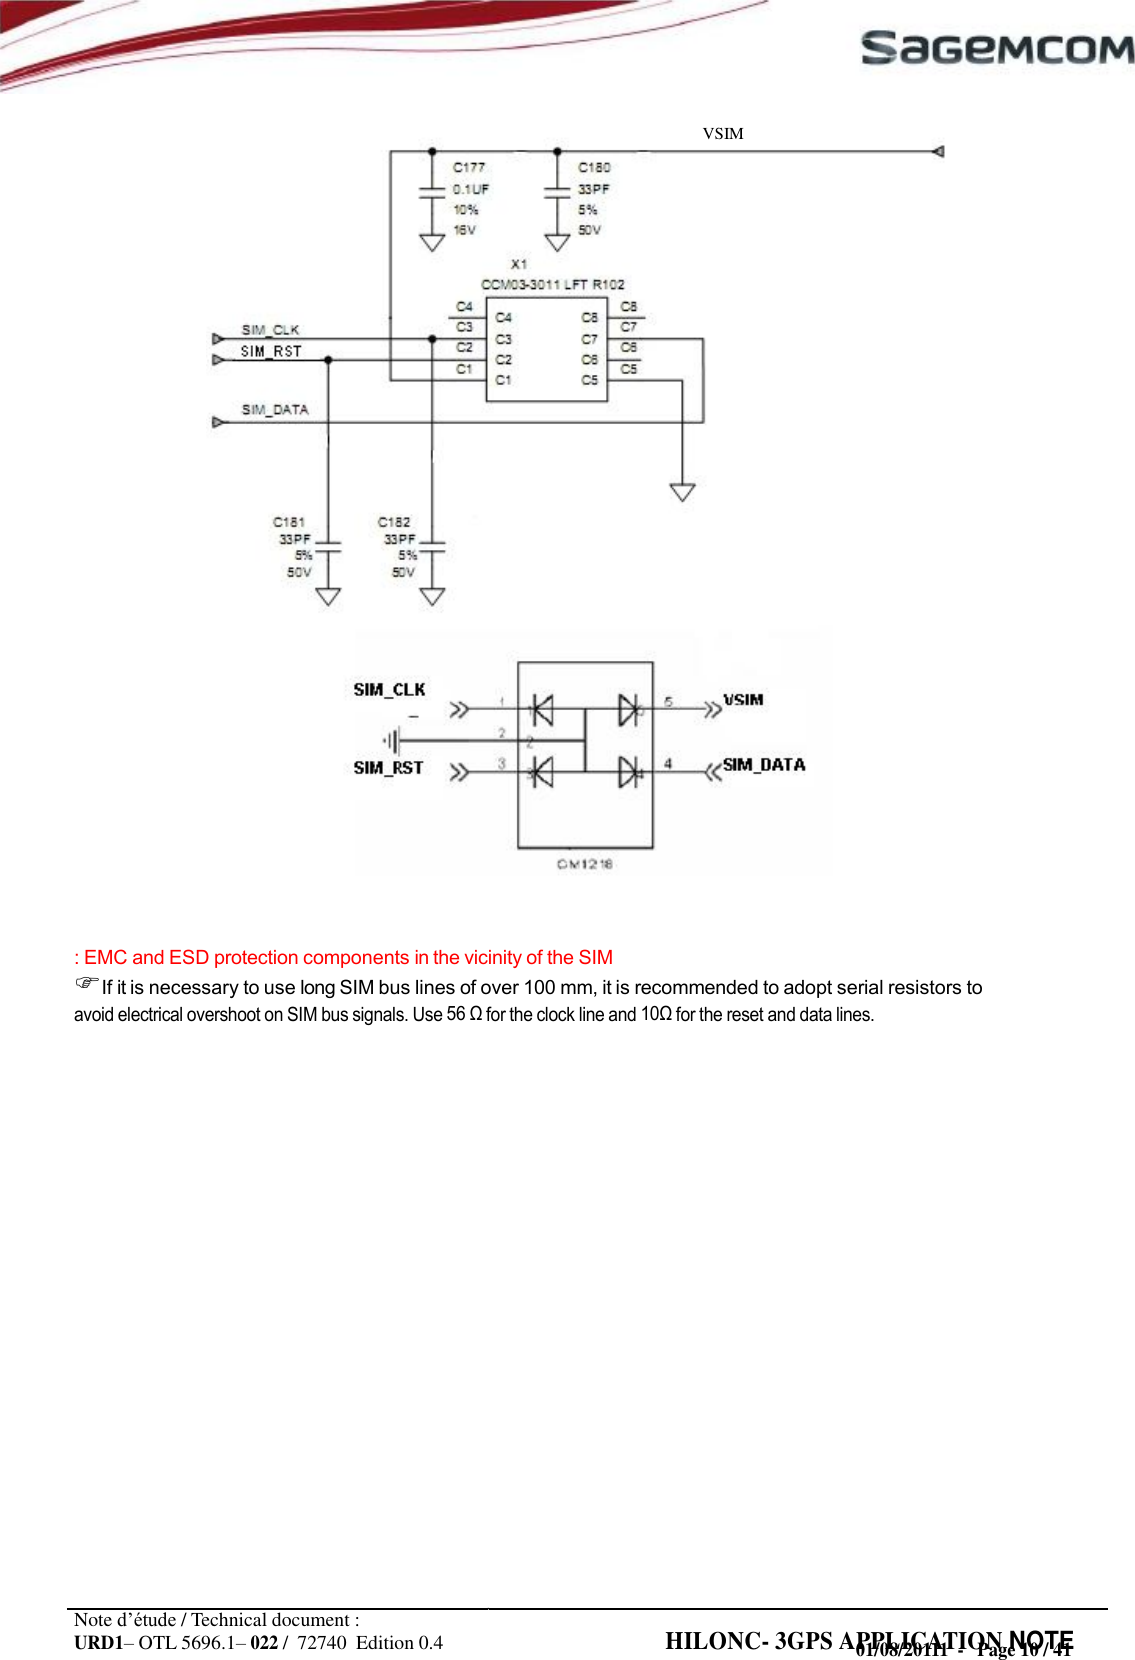 URD1– OTL 5696.1– 022 /  72740  Edition 0.4 HILONC- 3GPS APPLICATION NOTE       VSIM                                : EMC and ESD protection components in the vicinity of the SIM If it is necessary to use long SIM bus lines of over 100 mm, it is recommended to adopt serial resistors to avoid electrical overshoot on SIM bus signals. Use 56  for the clock line and  for the reset and data lines.                        Note d’étude / Technical document : 01/08/20111  -   Page 10 / 41